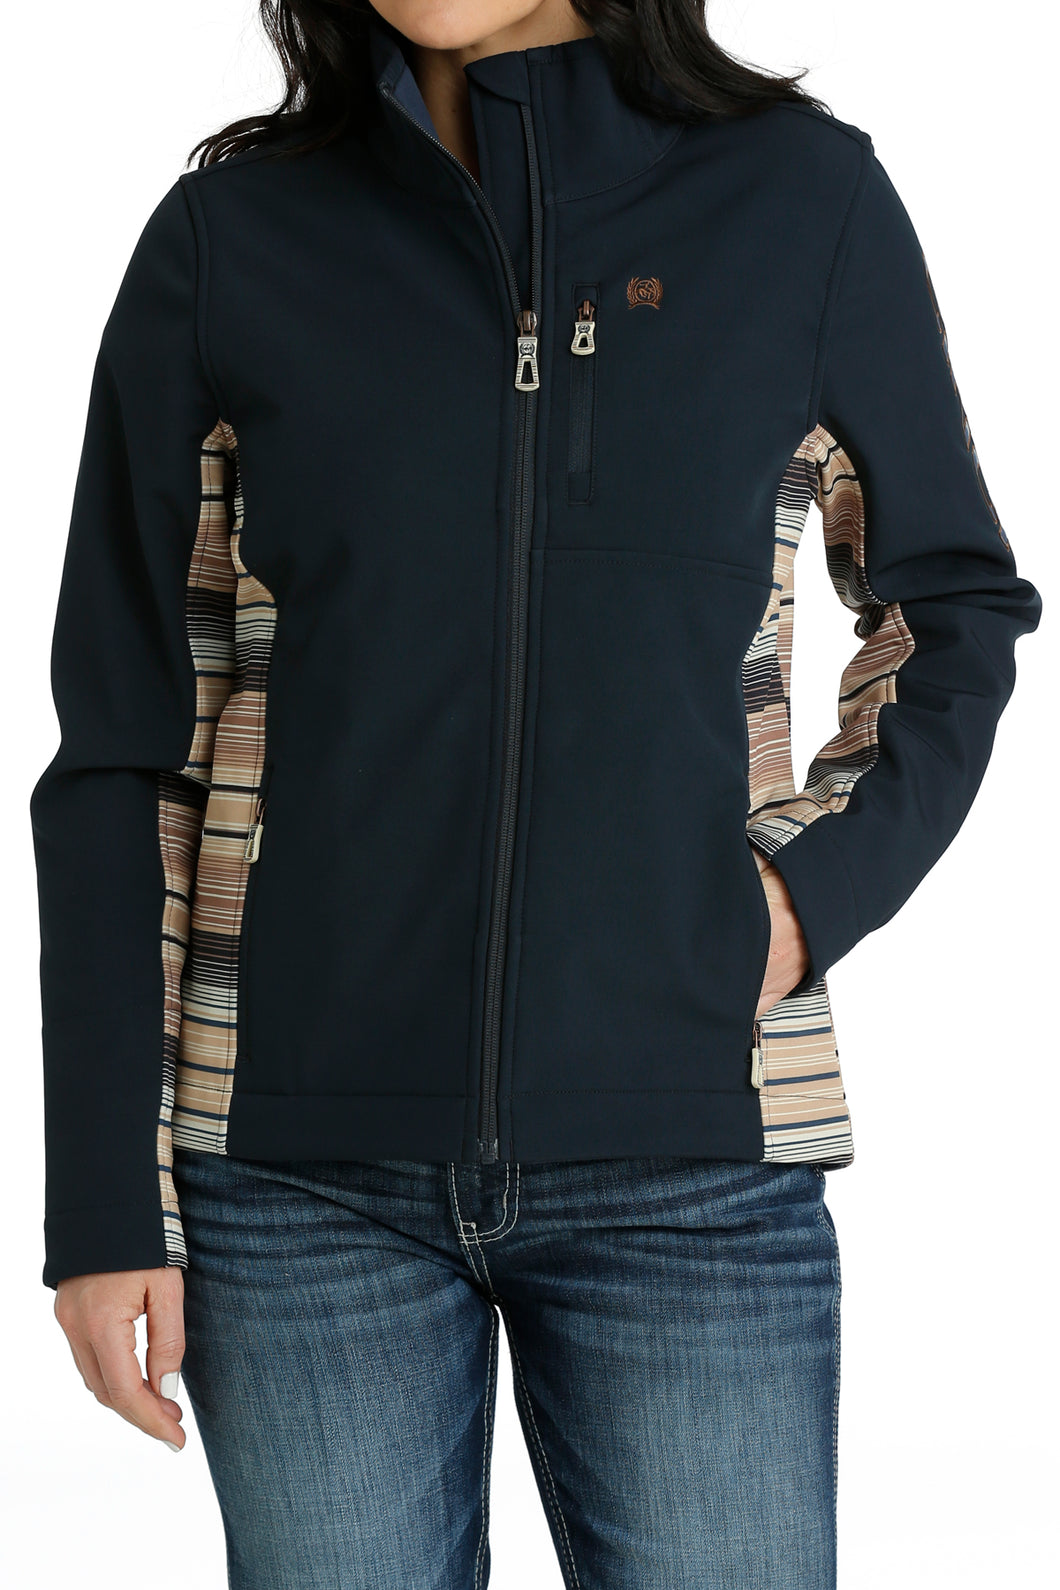 Pard's Western Shop Cinch Navy Conceal Carry Bonded Jacket for Women